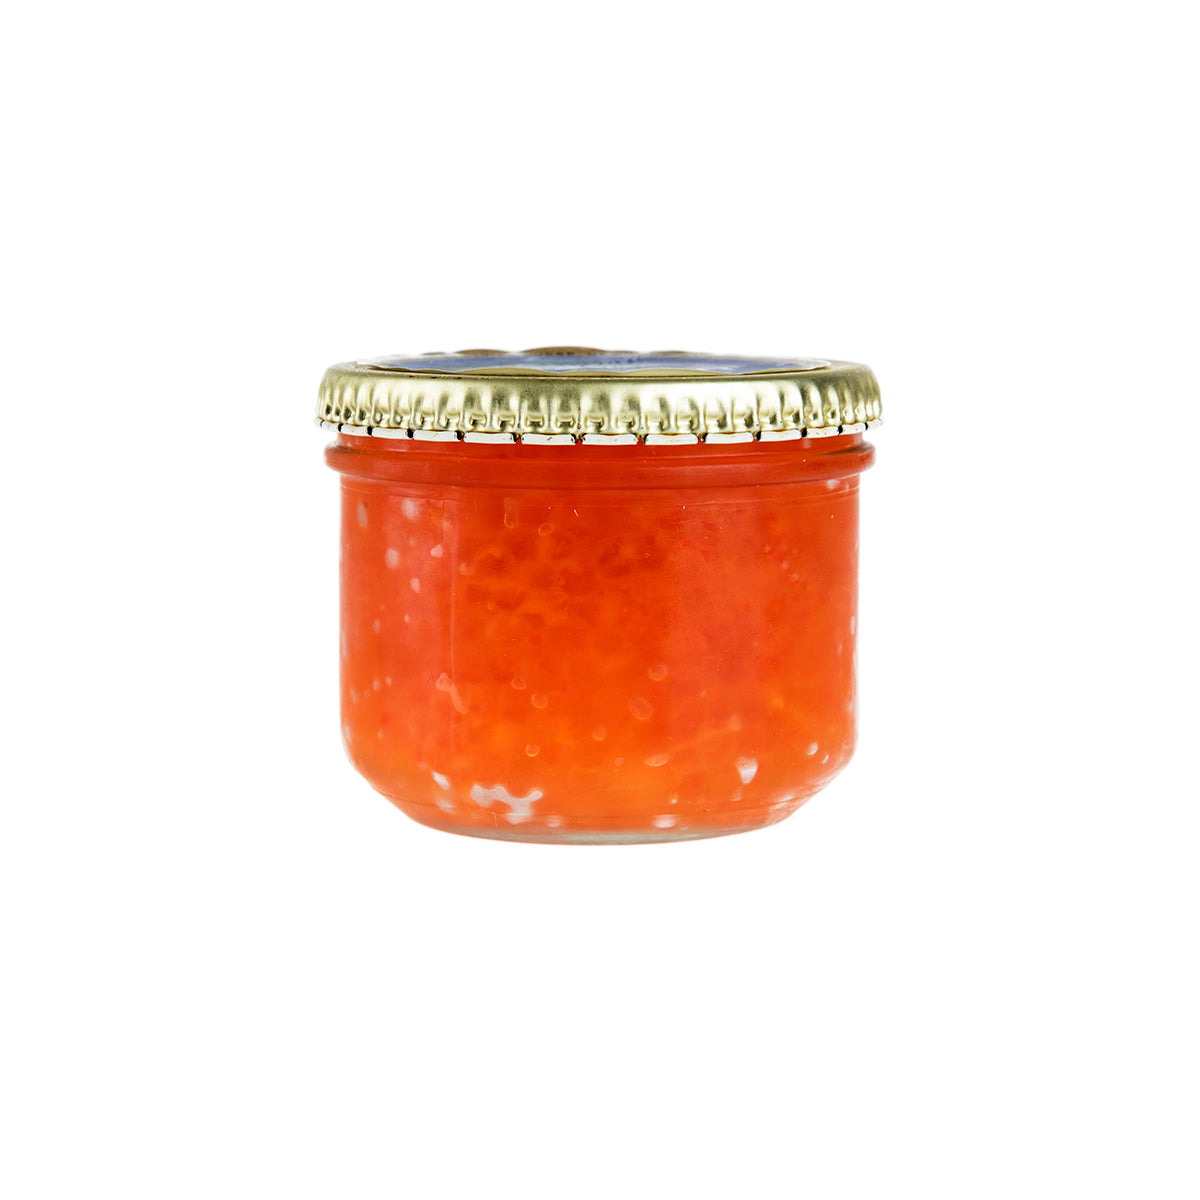 Caviarland Smoked Trout Roe